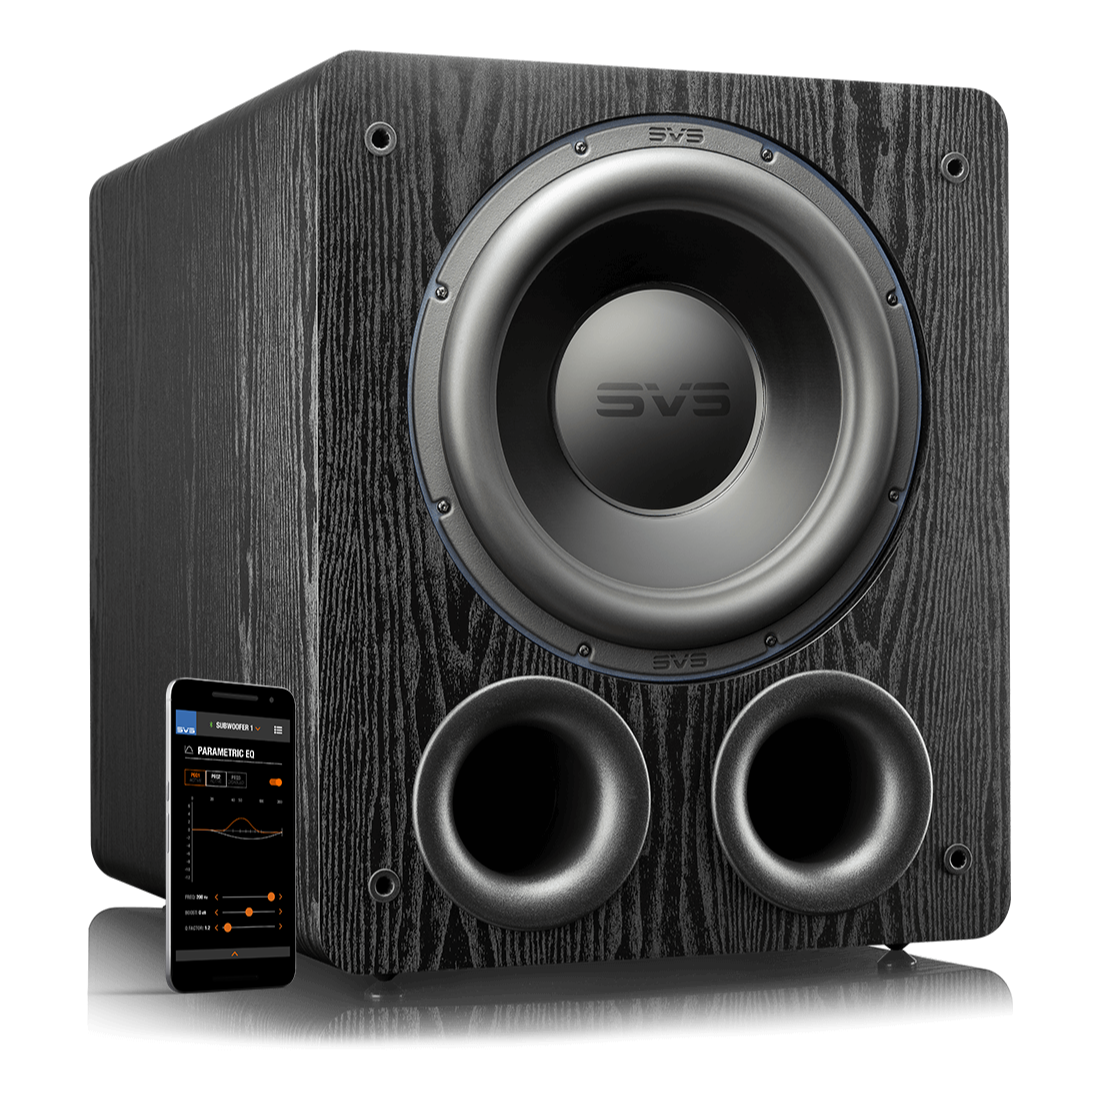 Hits the ultimate sweet spot for ported subwoofers with massive output and subterranean extension that exceeds much larger and more expensive subwoofers. PB-3000 Reference Subwoofer Performance Hits New Lows. Crushing output and extreme low frequency extension down to 16Hz without sacrificing accuracy and control